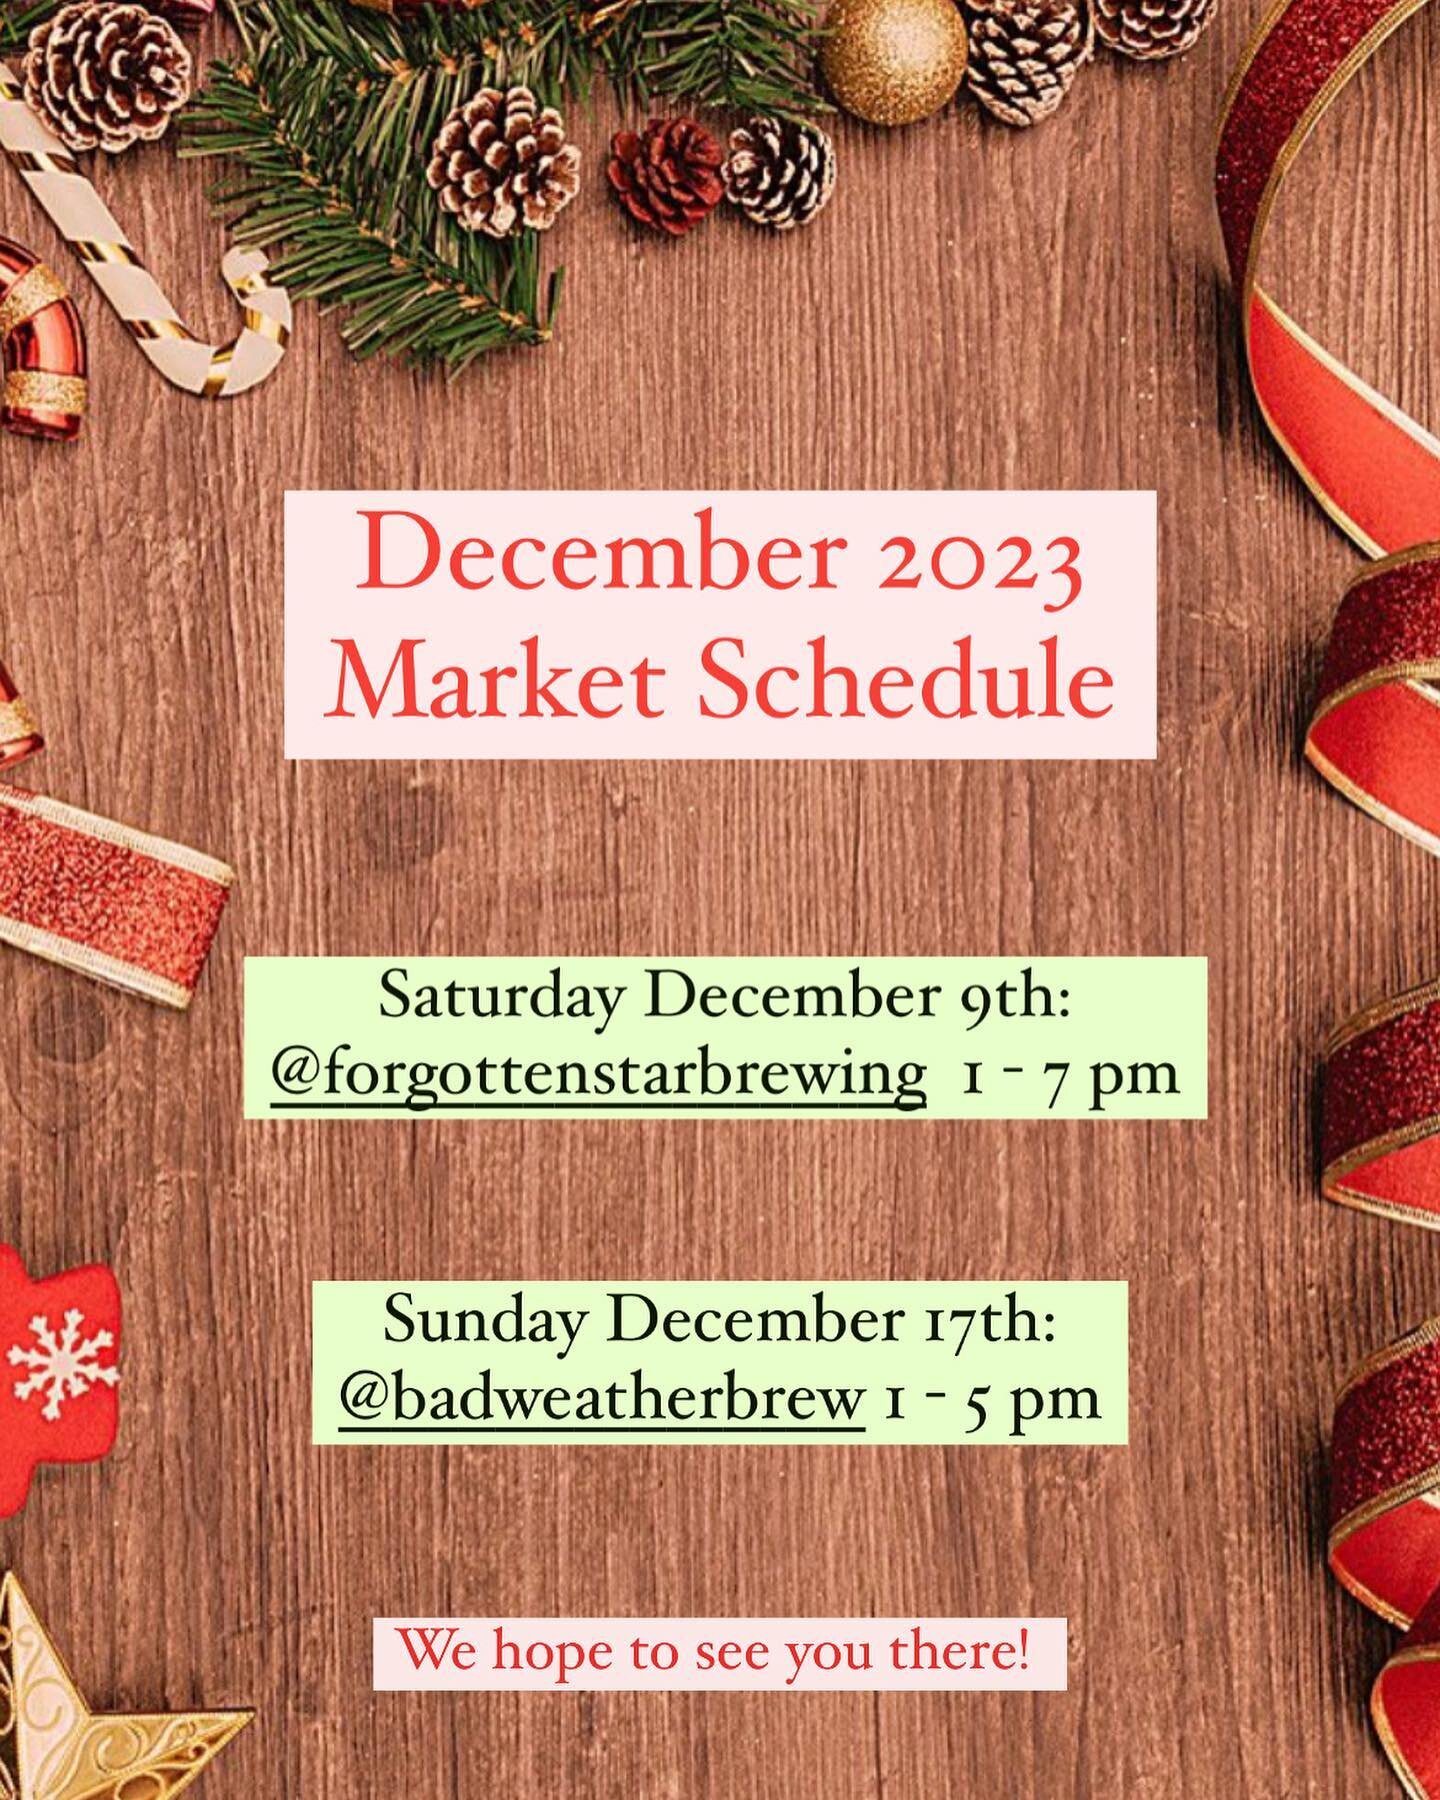 With our family getting a bit bigger this year we&rsquo;re not able to get out and see your smiling faces as much this year, but we&rsquo;re getting two more markets in before the holidays! Come see us Saturday December 9th at @forgottenstarbrewing a